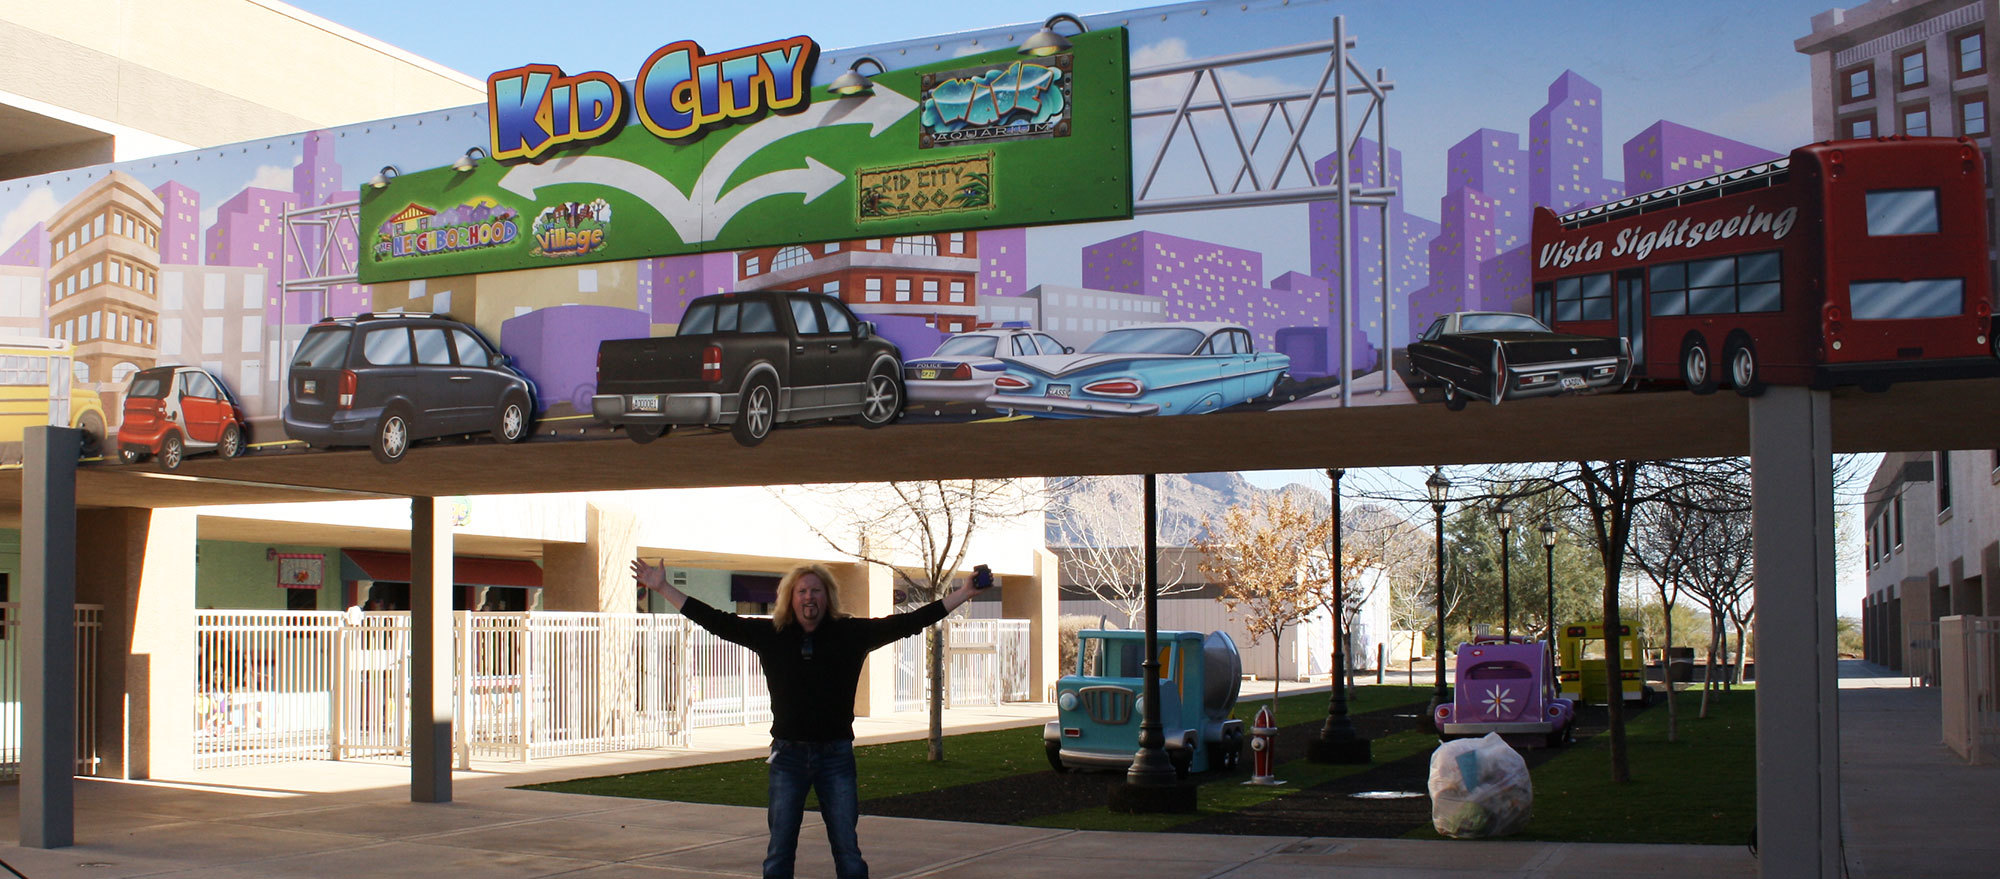 Bruce Barry underneath a large outdoor mural of a Toon Town Big City skyline with sign reading "Kid City" at Casas Church